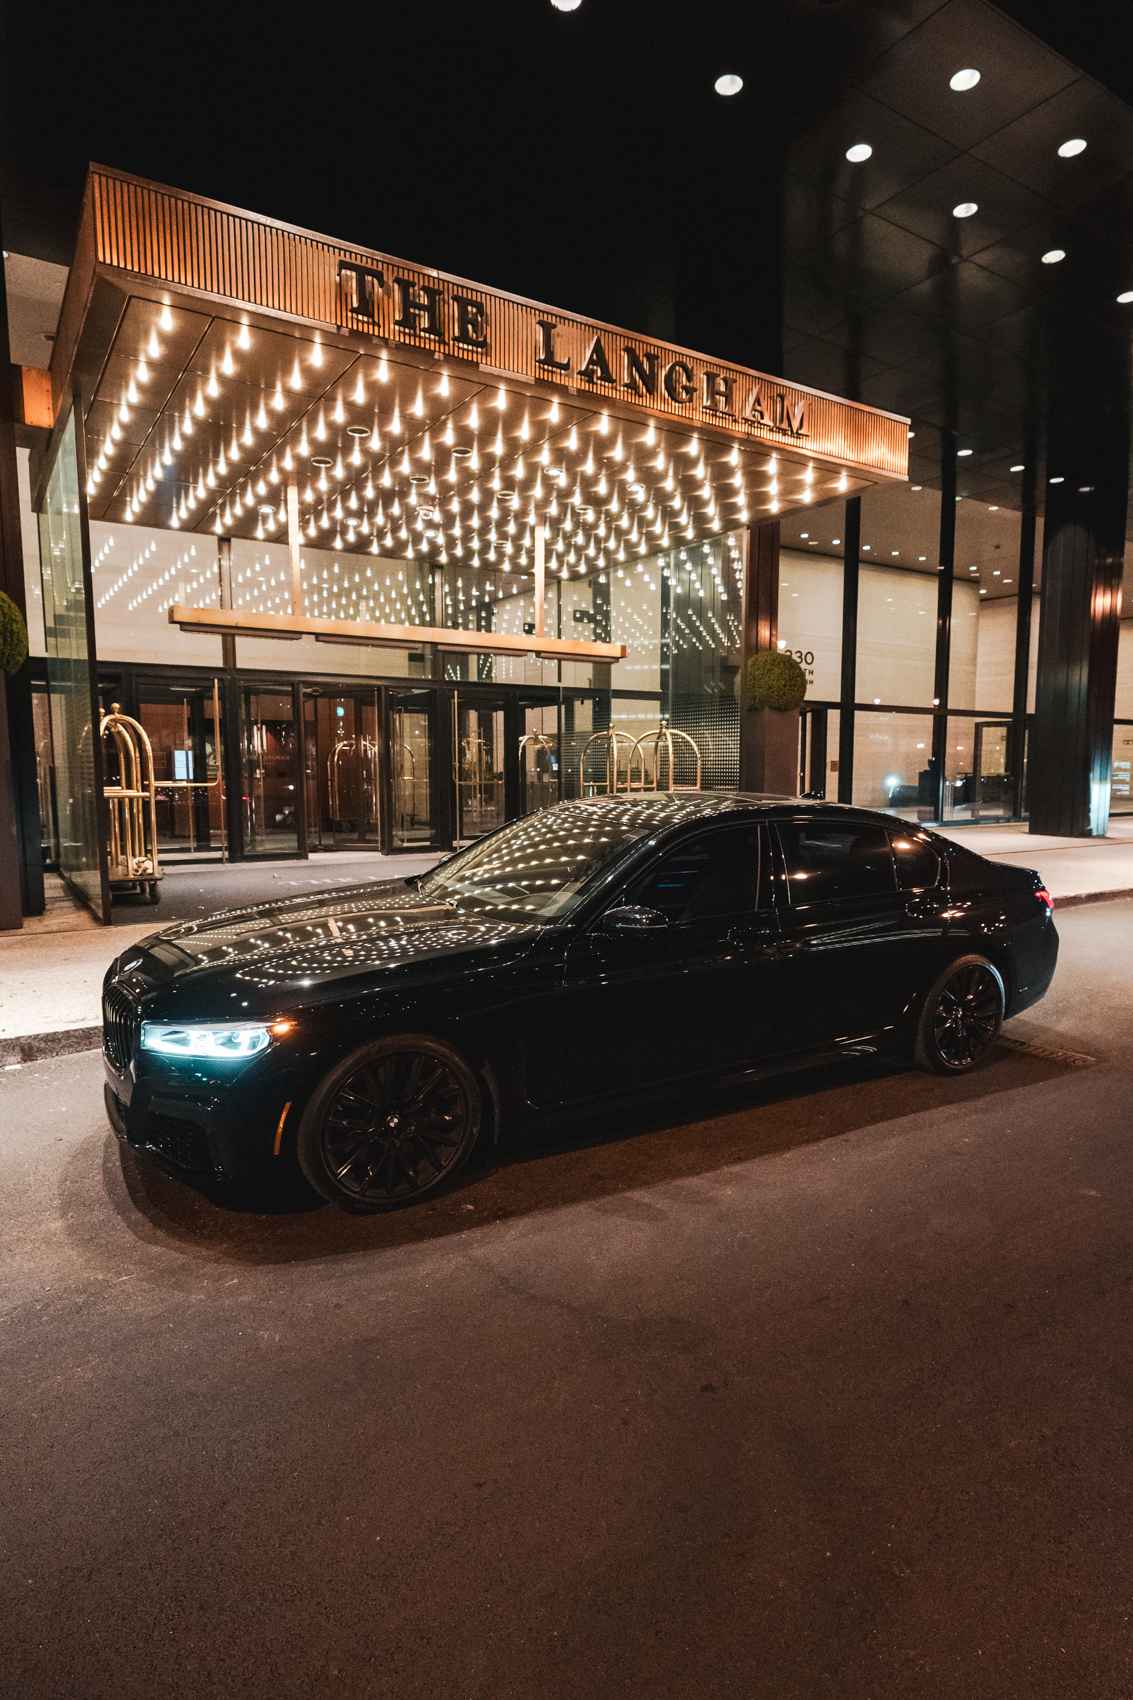 Chicago Limo Service